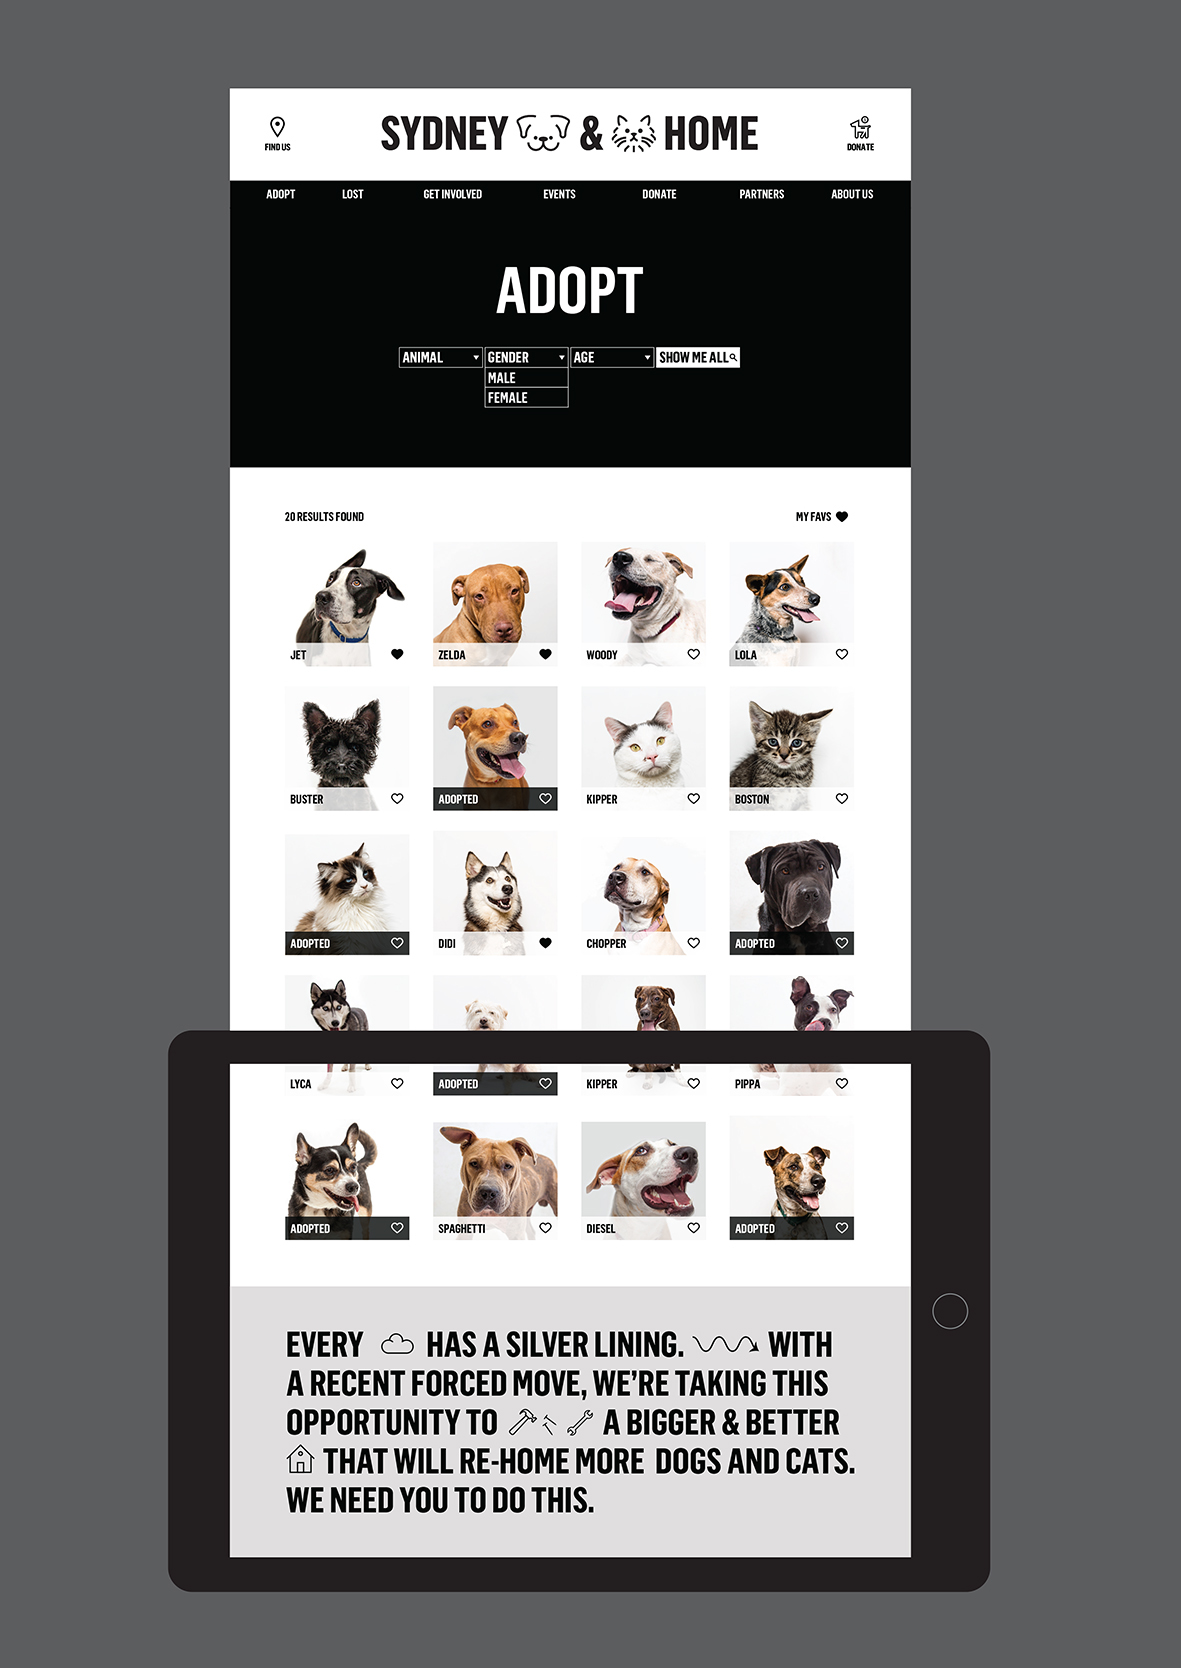 Australia shelter dogs cats care adopt identity Generator logos data-driven animal ForthePeople sdch dog